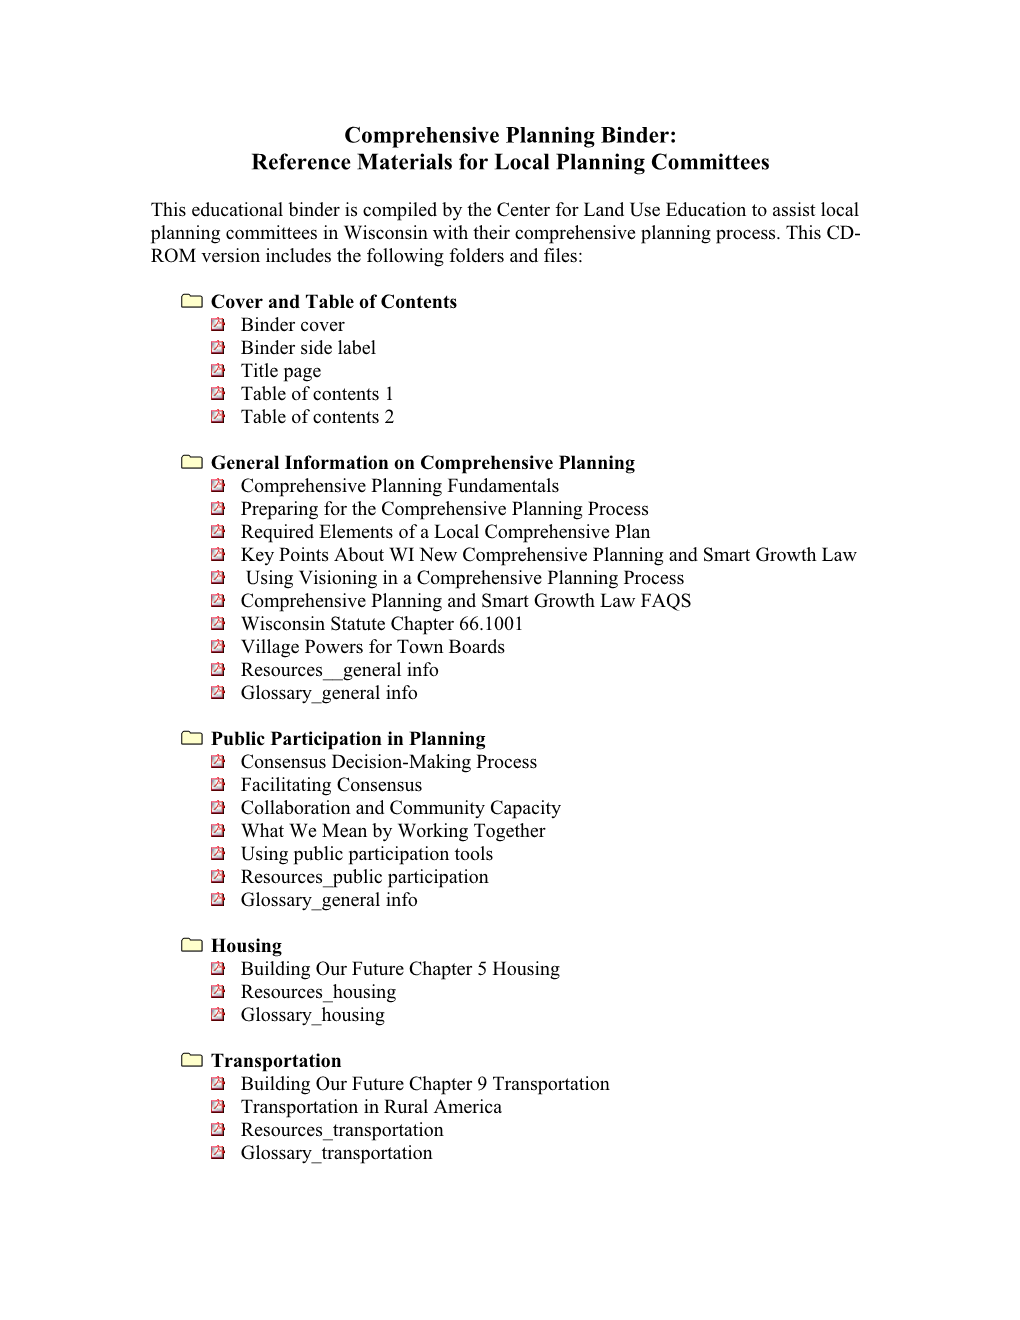 Comprehensive Planning Binder: Reference Materials for Local Planning Committees